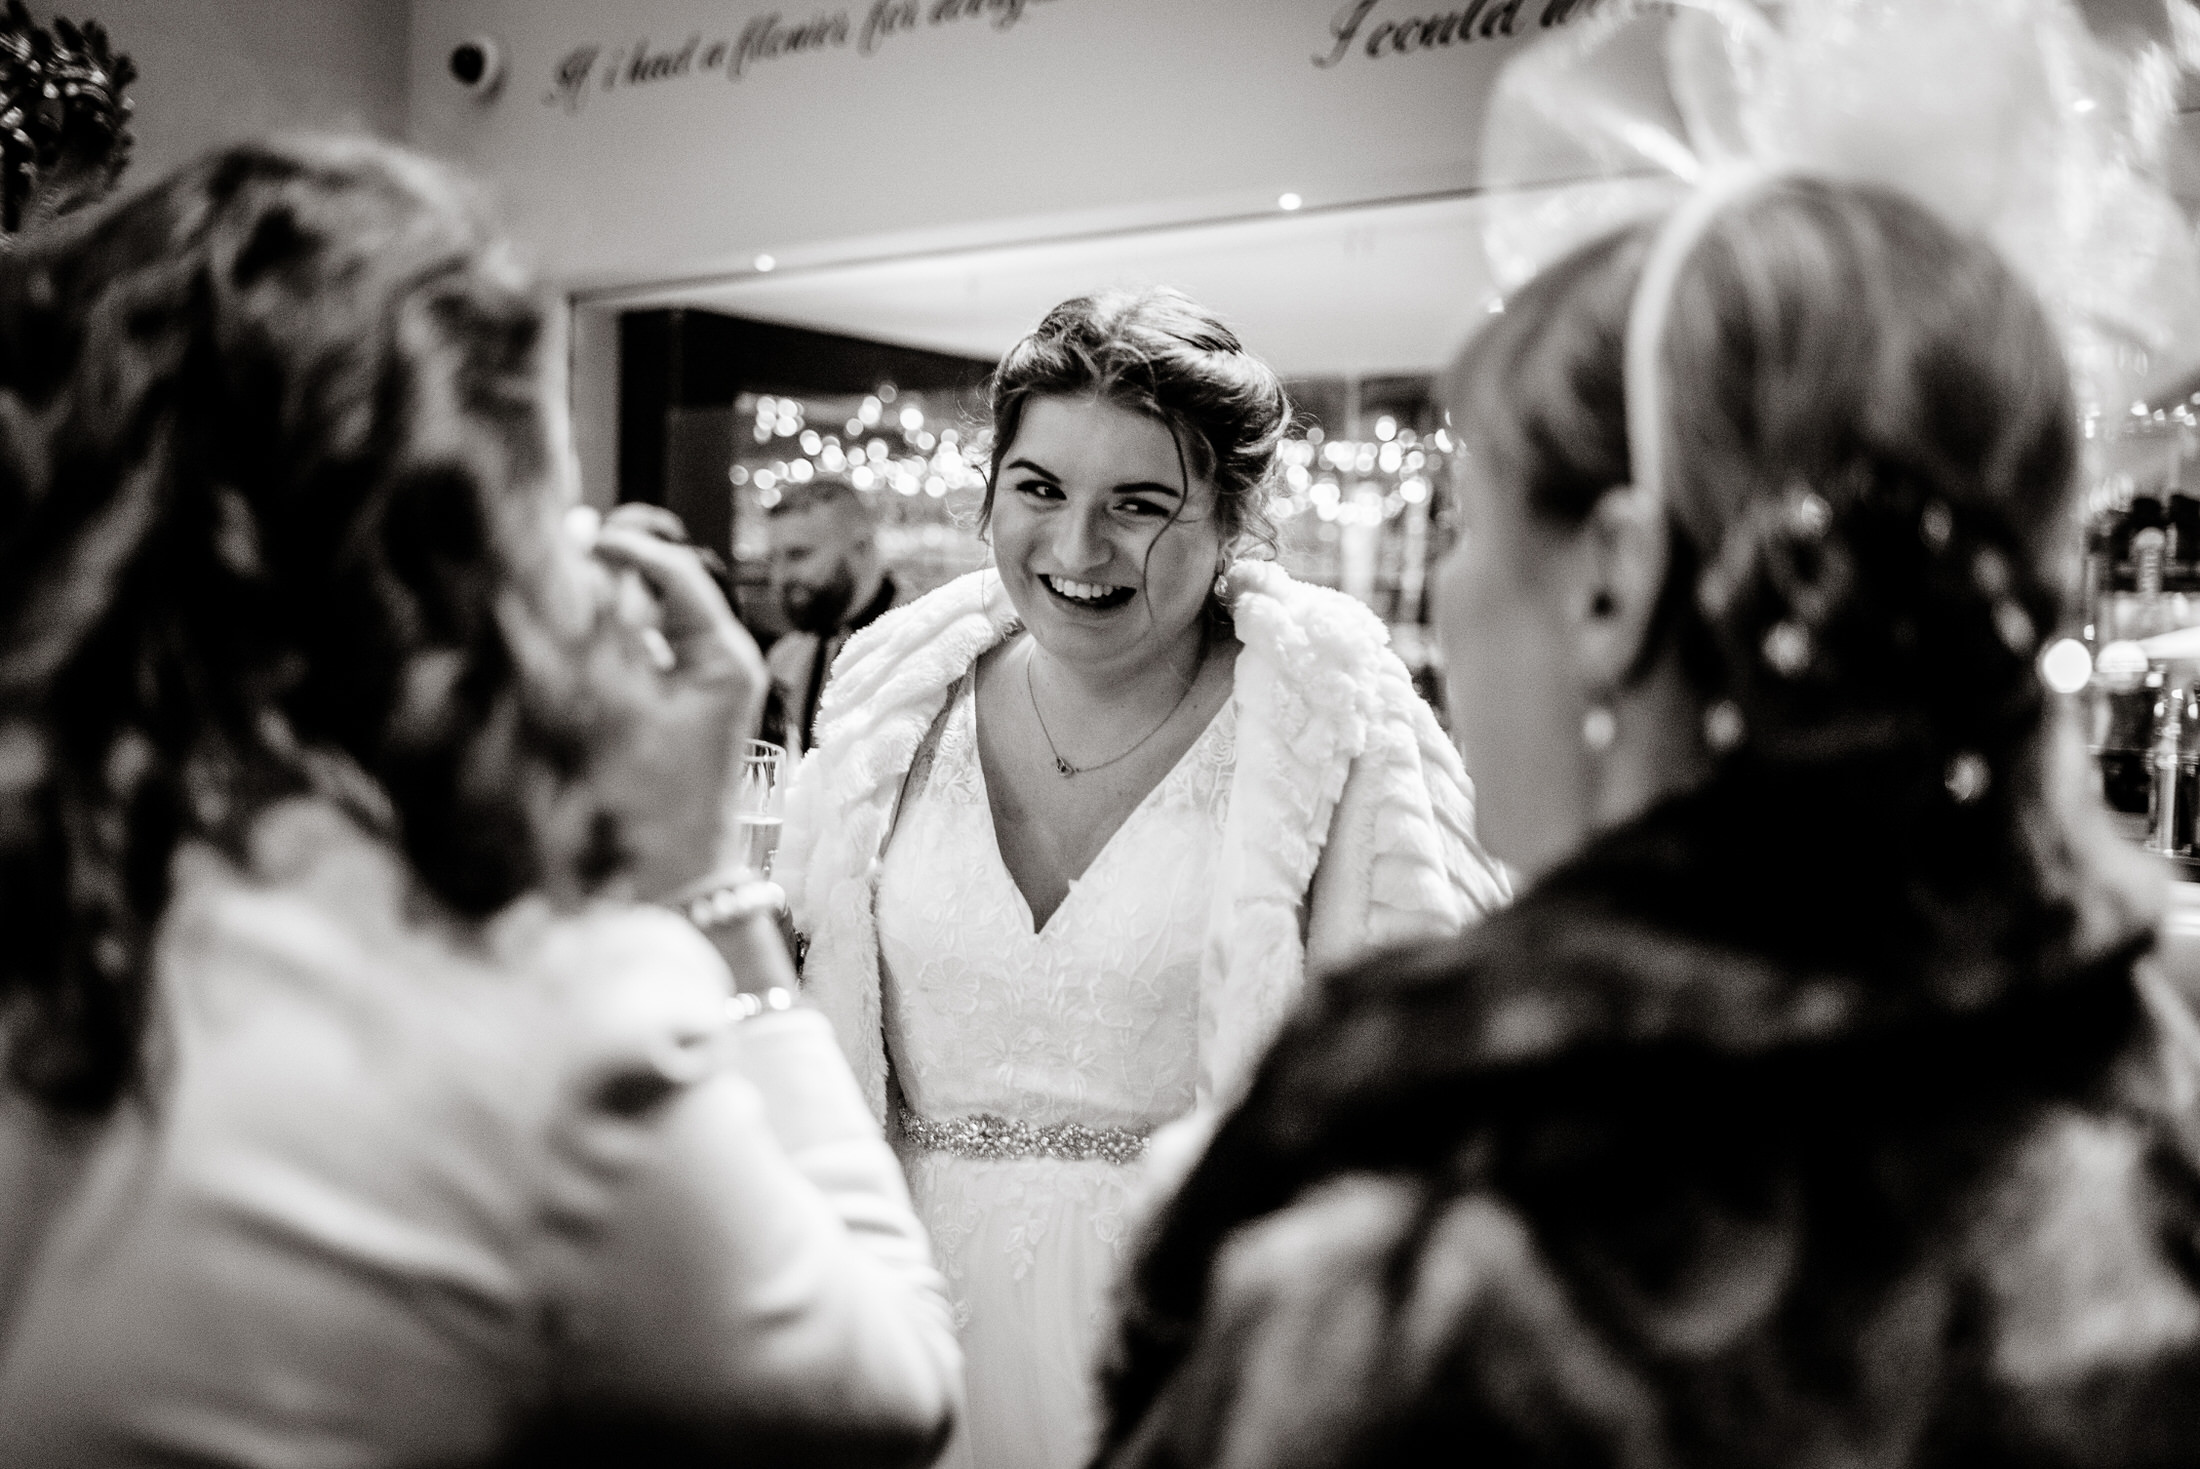 A bride smiles in front of a mirror at her wedding at Brackenborough Hotel.